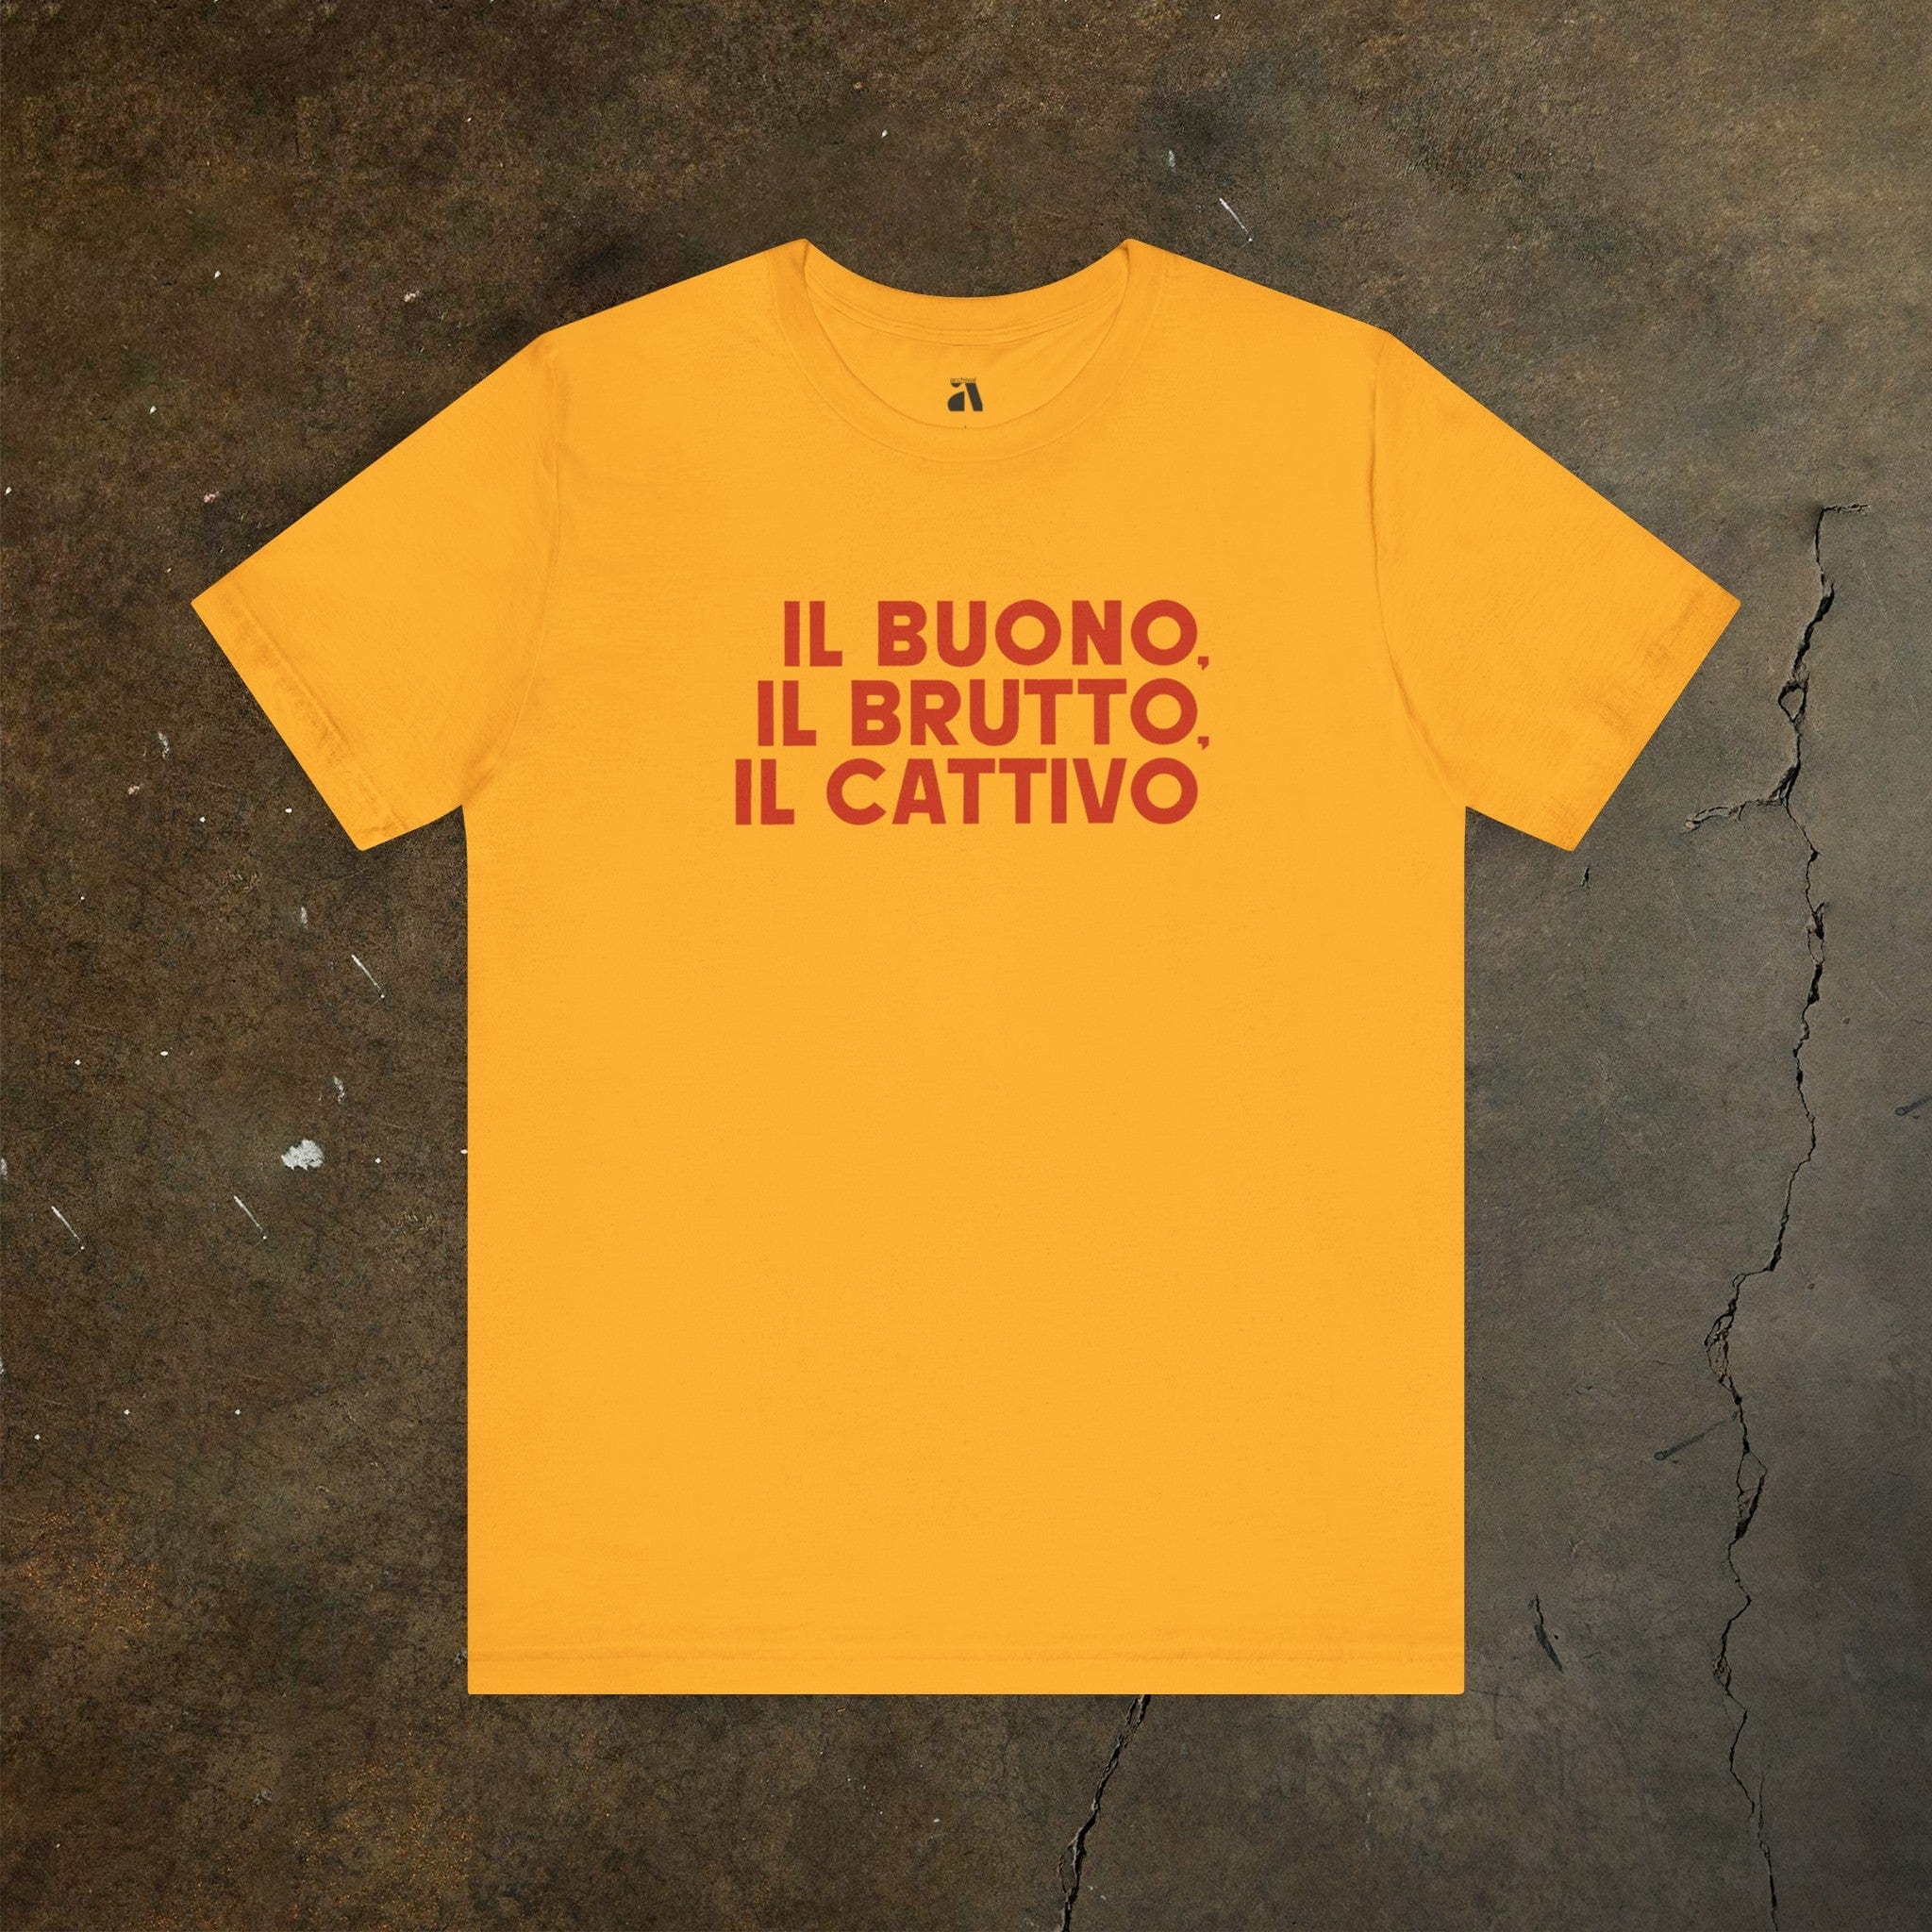 The Good, the Bad & the Ugly: Italiano T-Shirt